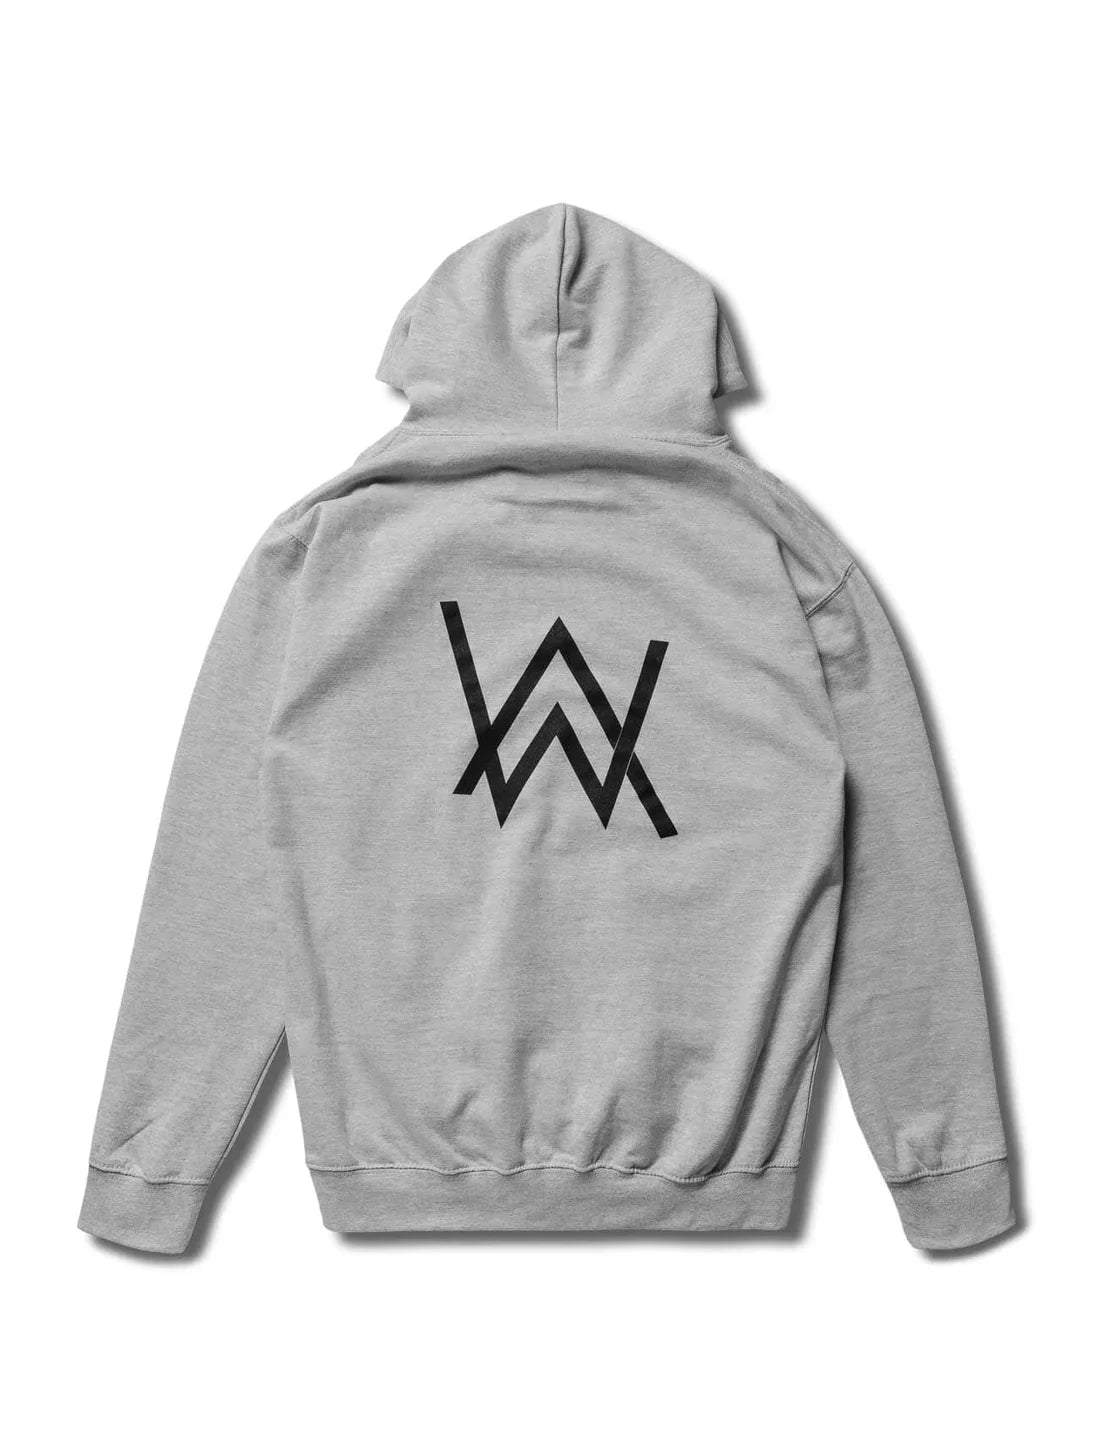 Back view of the grey Potato Logo Hoodie highlighting the bold Alan Walker logo in contrasting black.